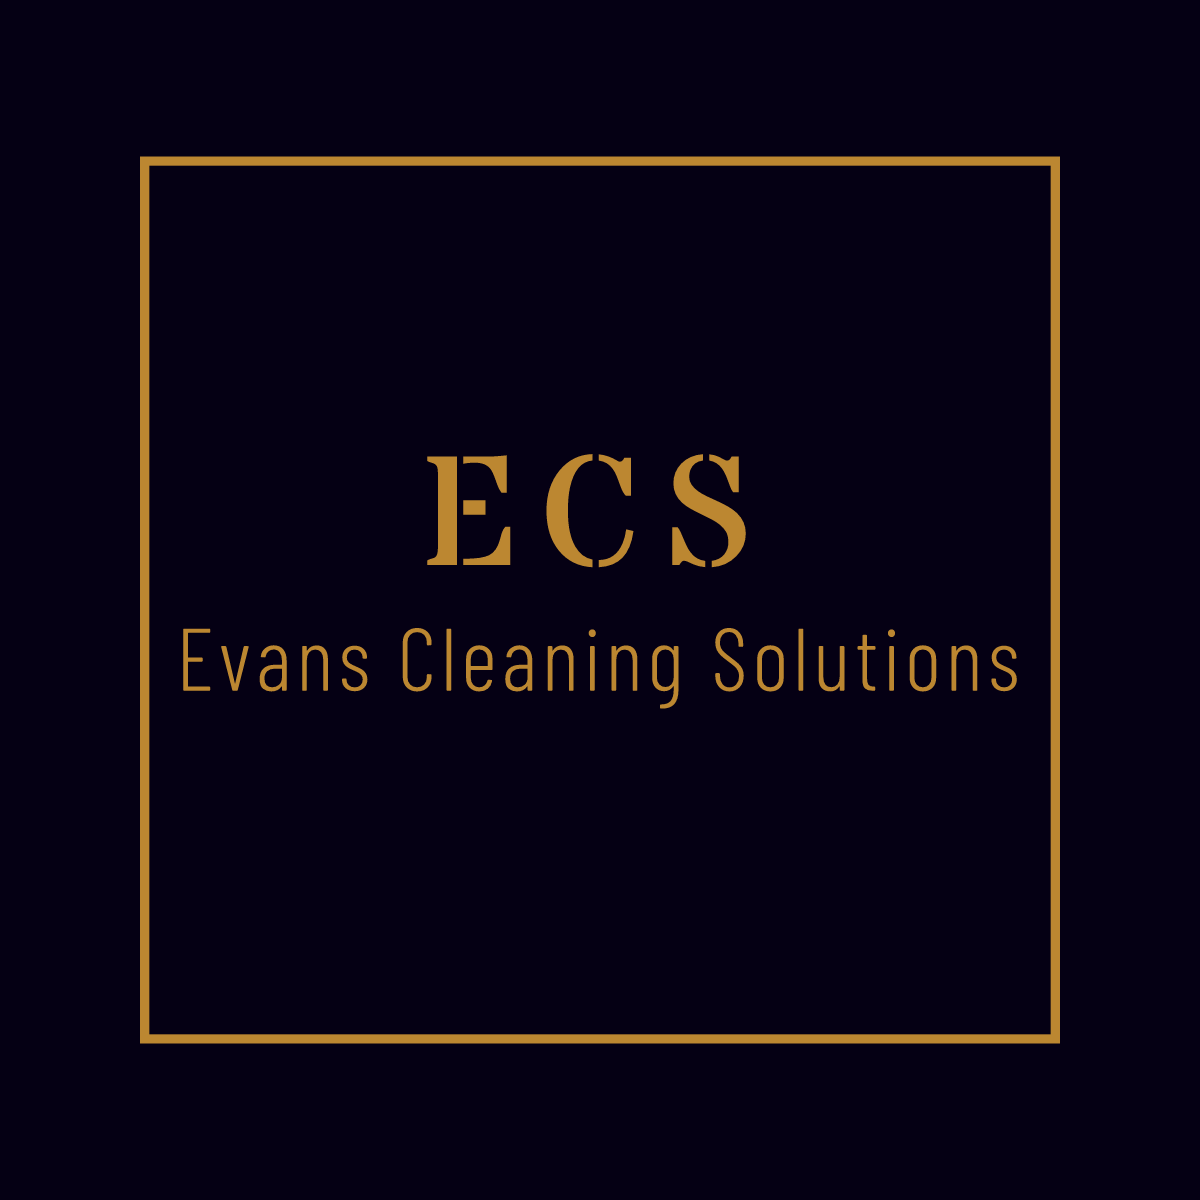 Evans Cleaning Solutions - The Service you Deserve